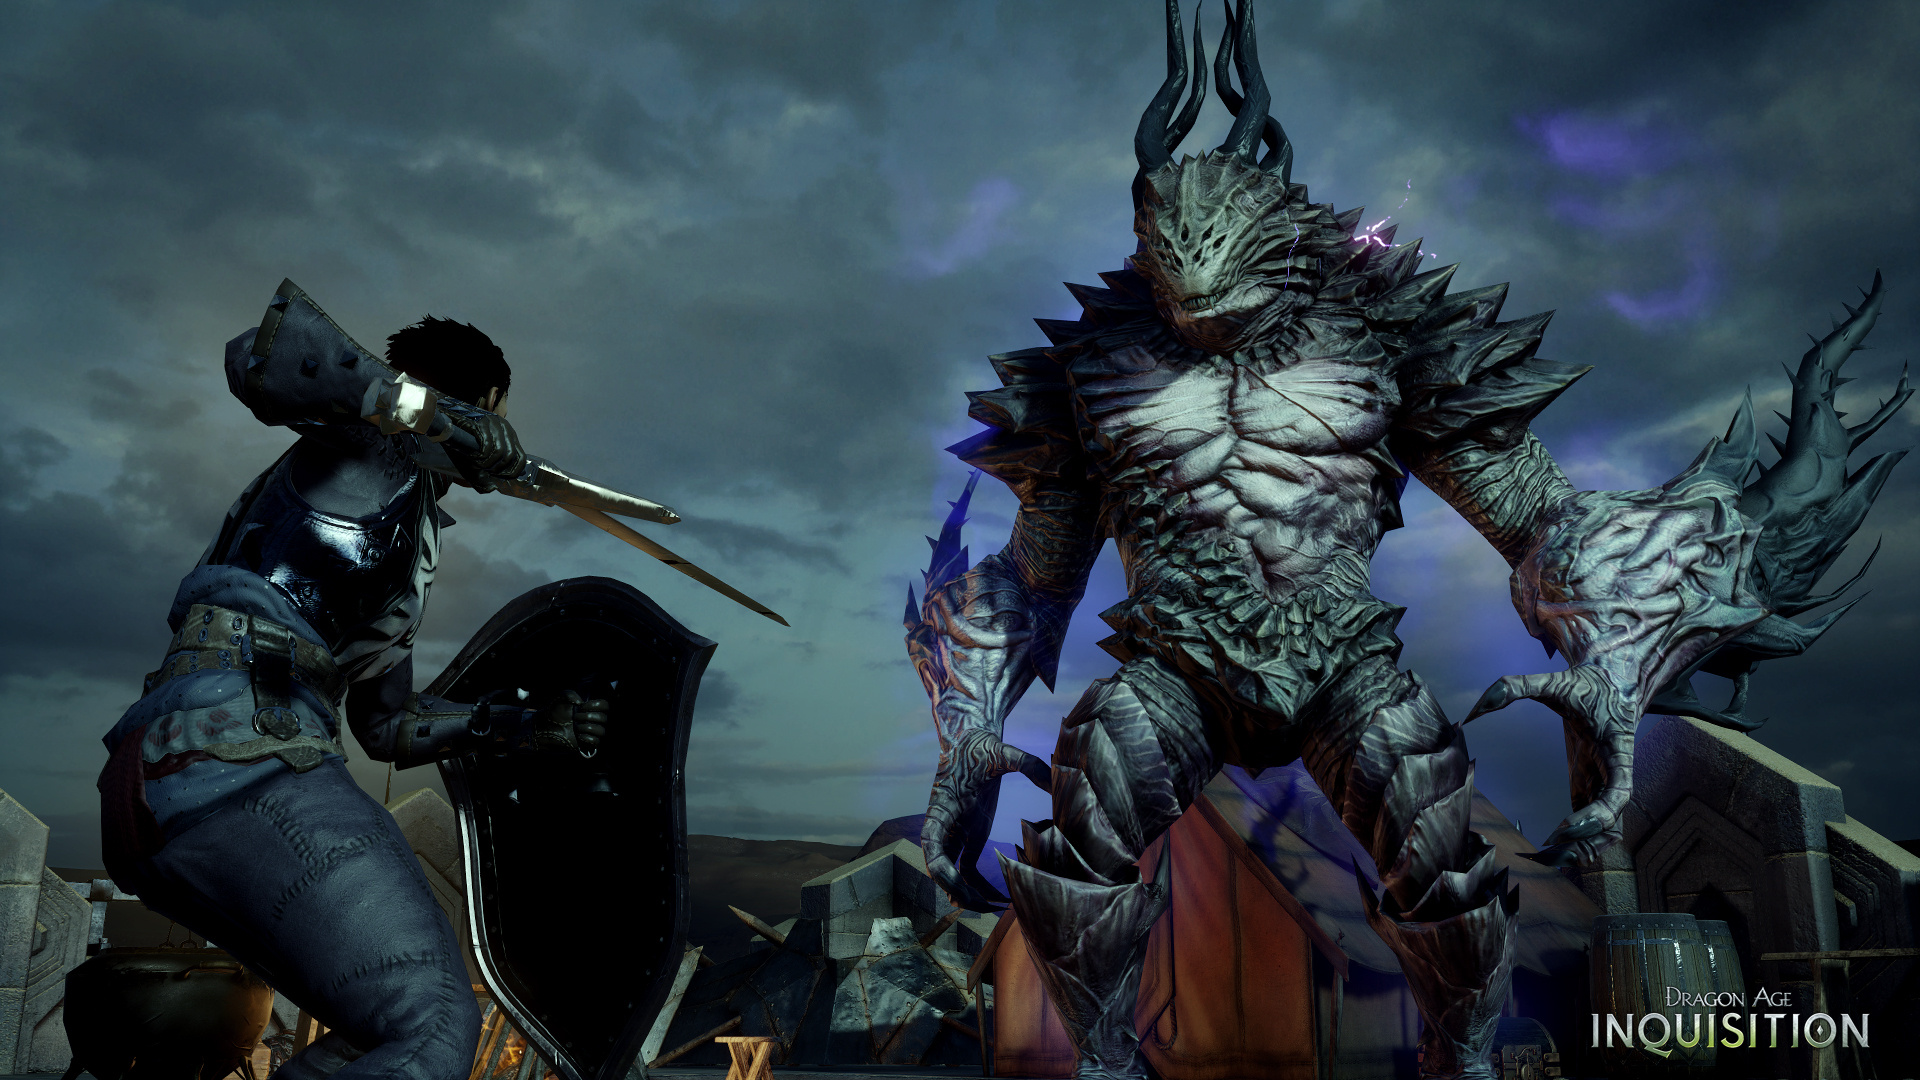 Multiplayer comes to Dragon Age with Inquisition's 4-player co-op mode -  Polygon